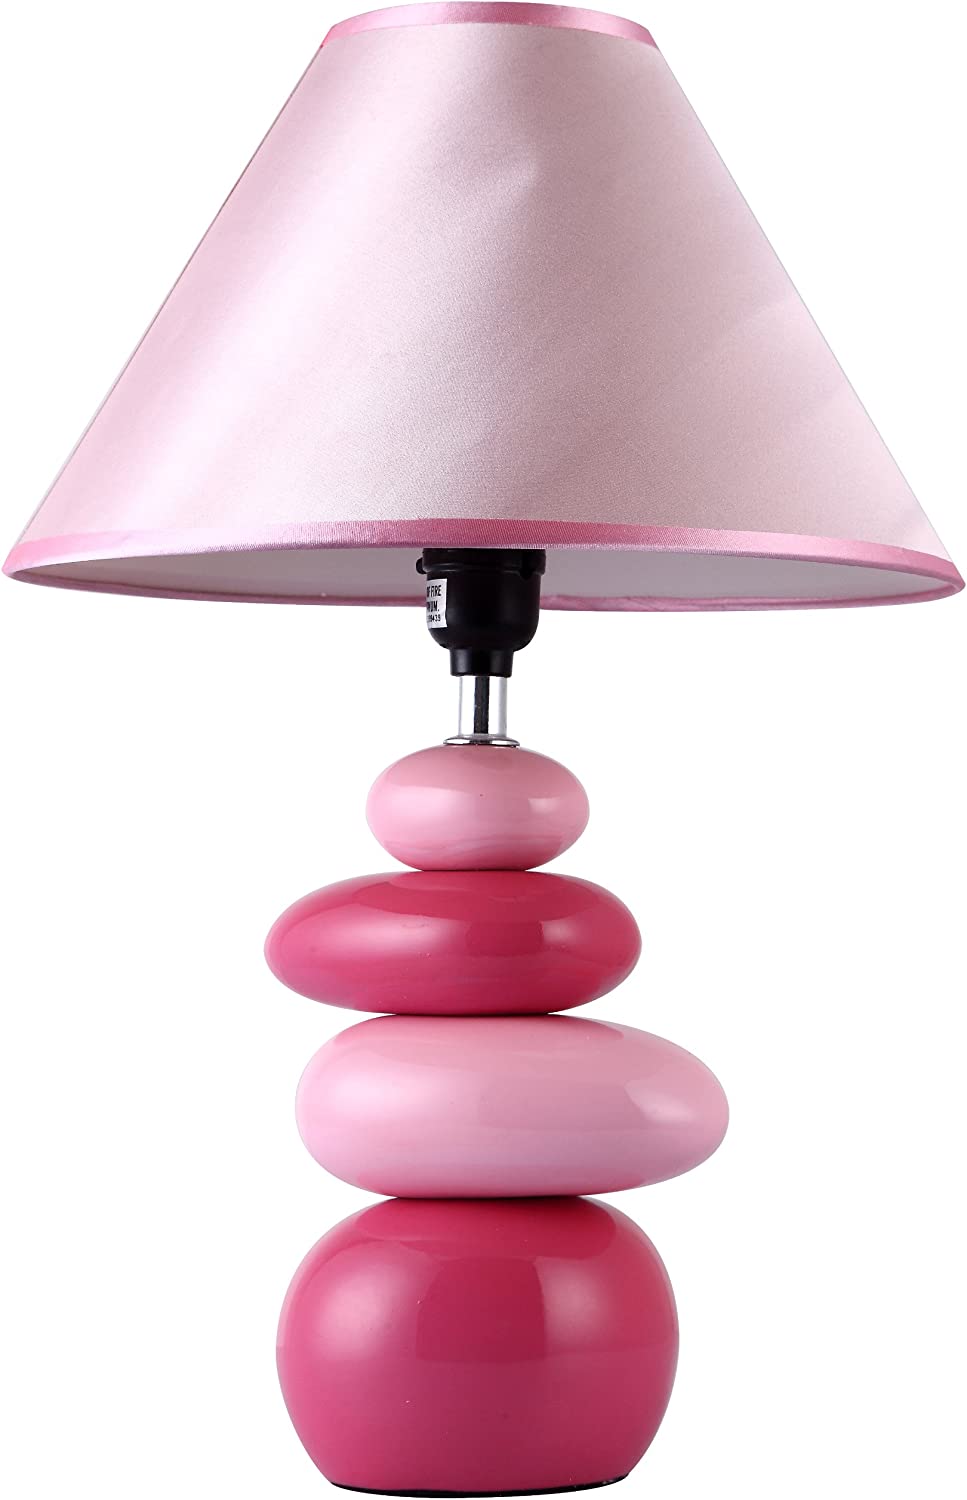 Simple Designs LT3051-PNK 17.55" Shades of Pink Ceramic Stacked Stone Standard Table Lamp with Fabric Shade for Home Décor, Nightstand, End Table, Bedroom, Living Room, Office, Foyer, Pink